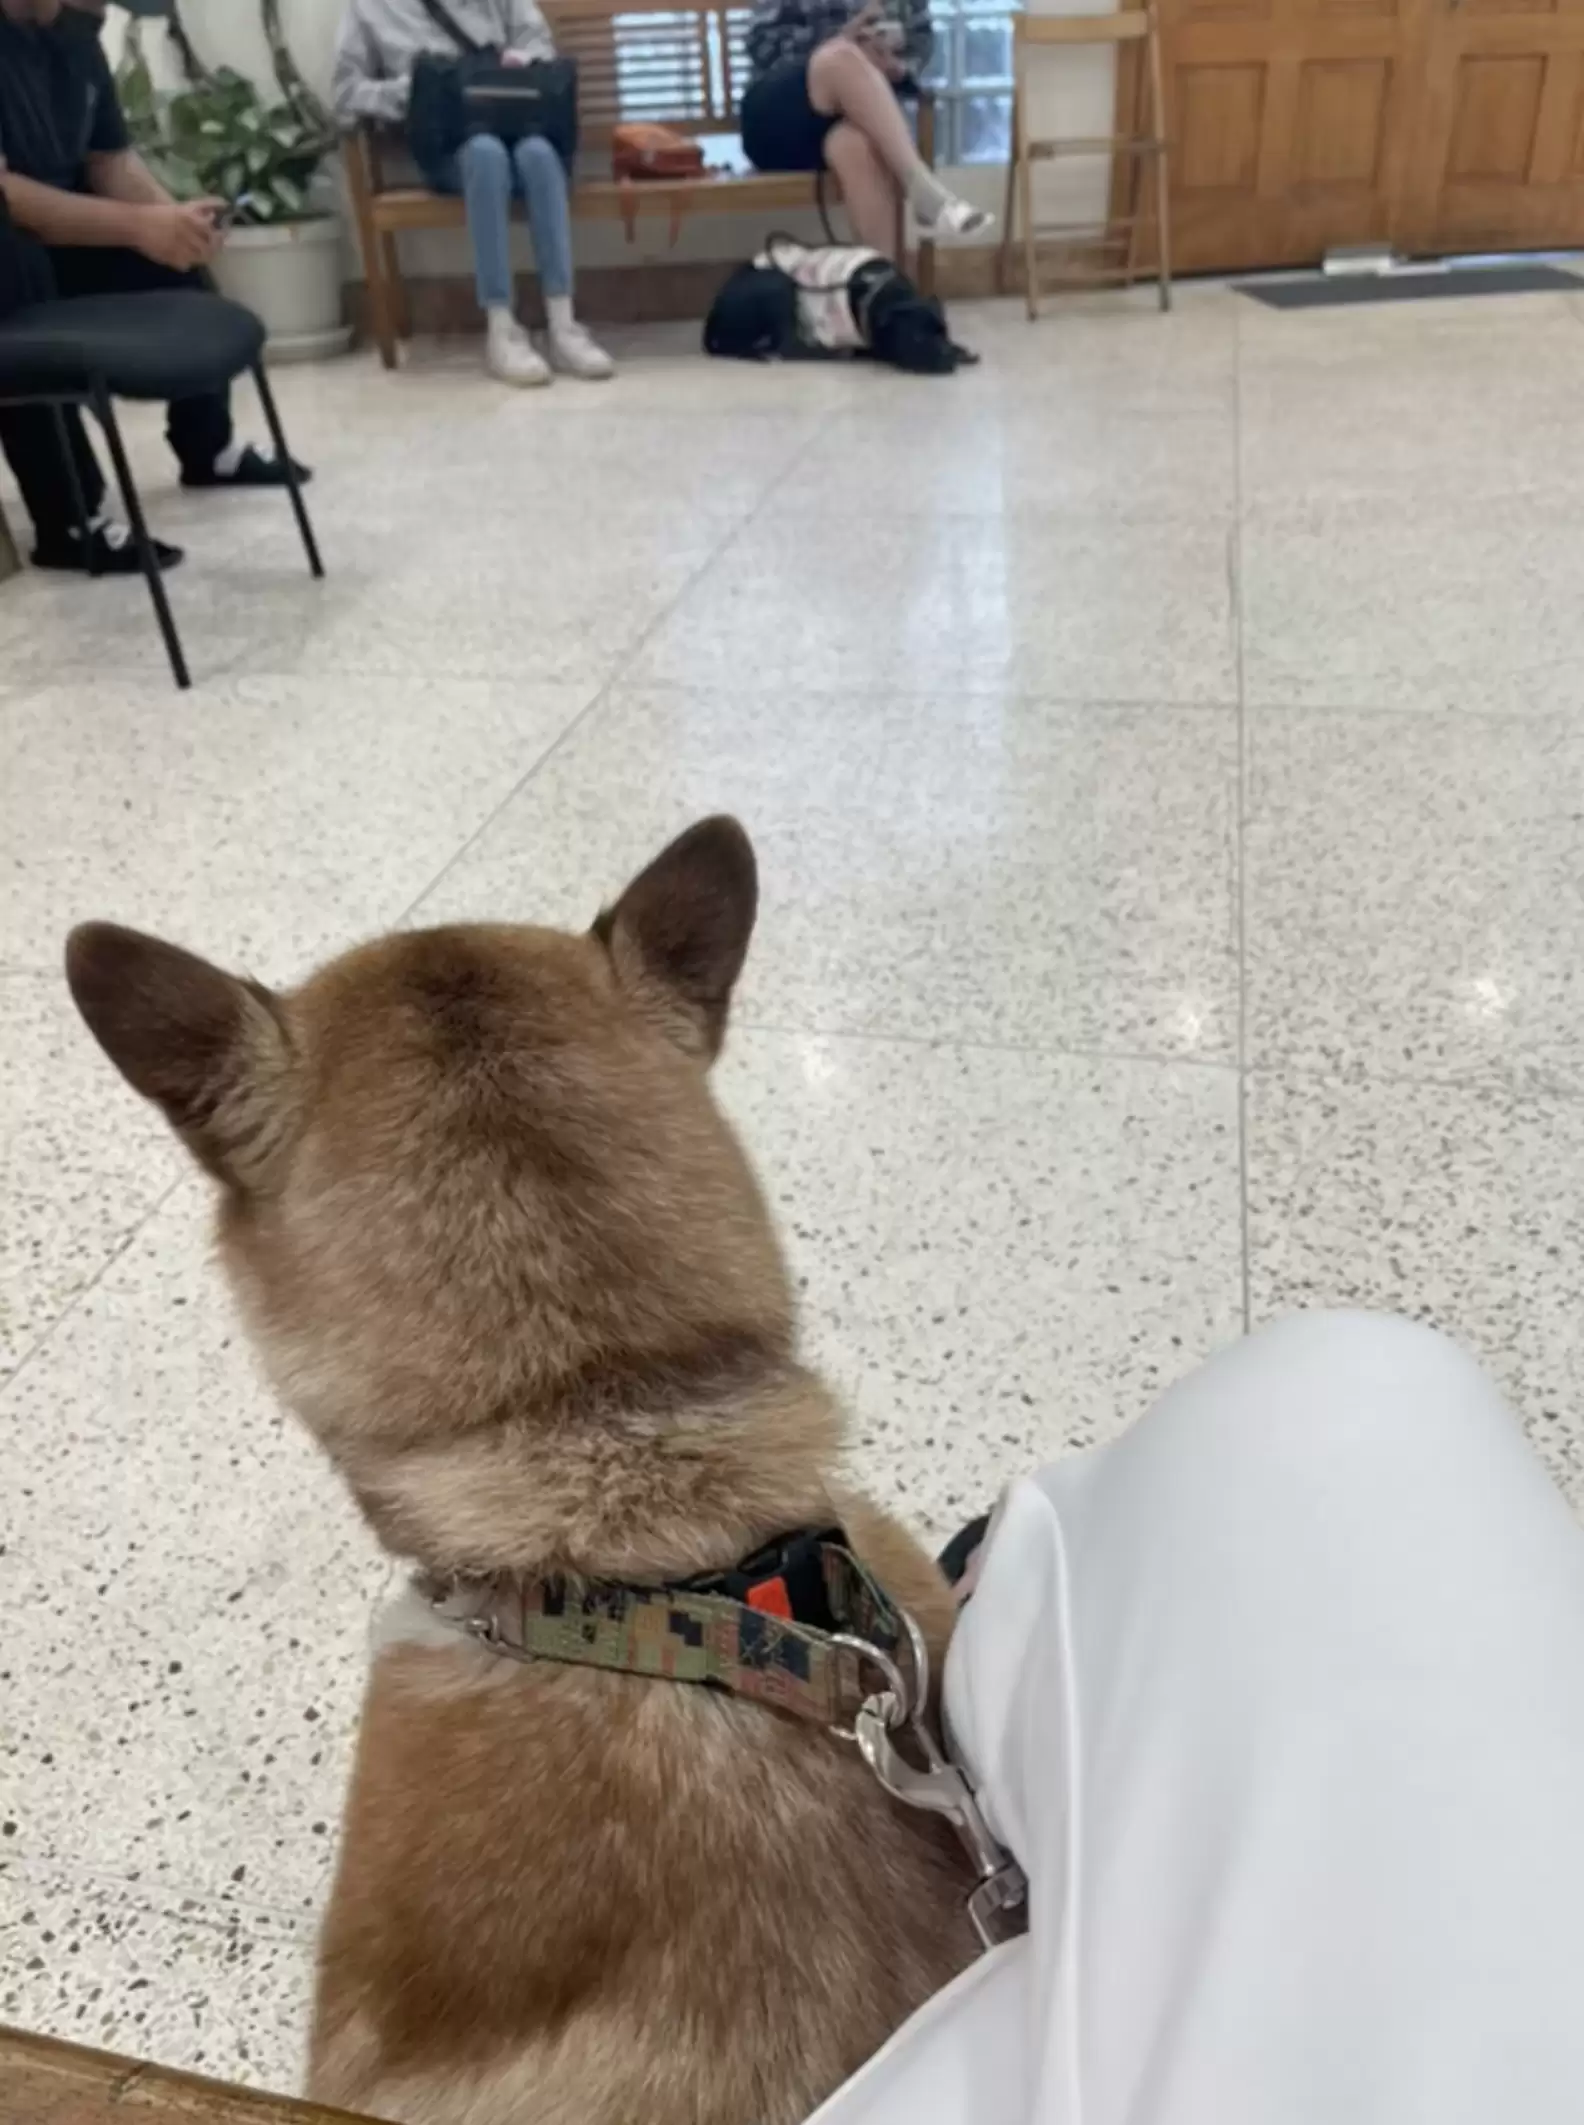 the dog sits on a leash next to the owner